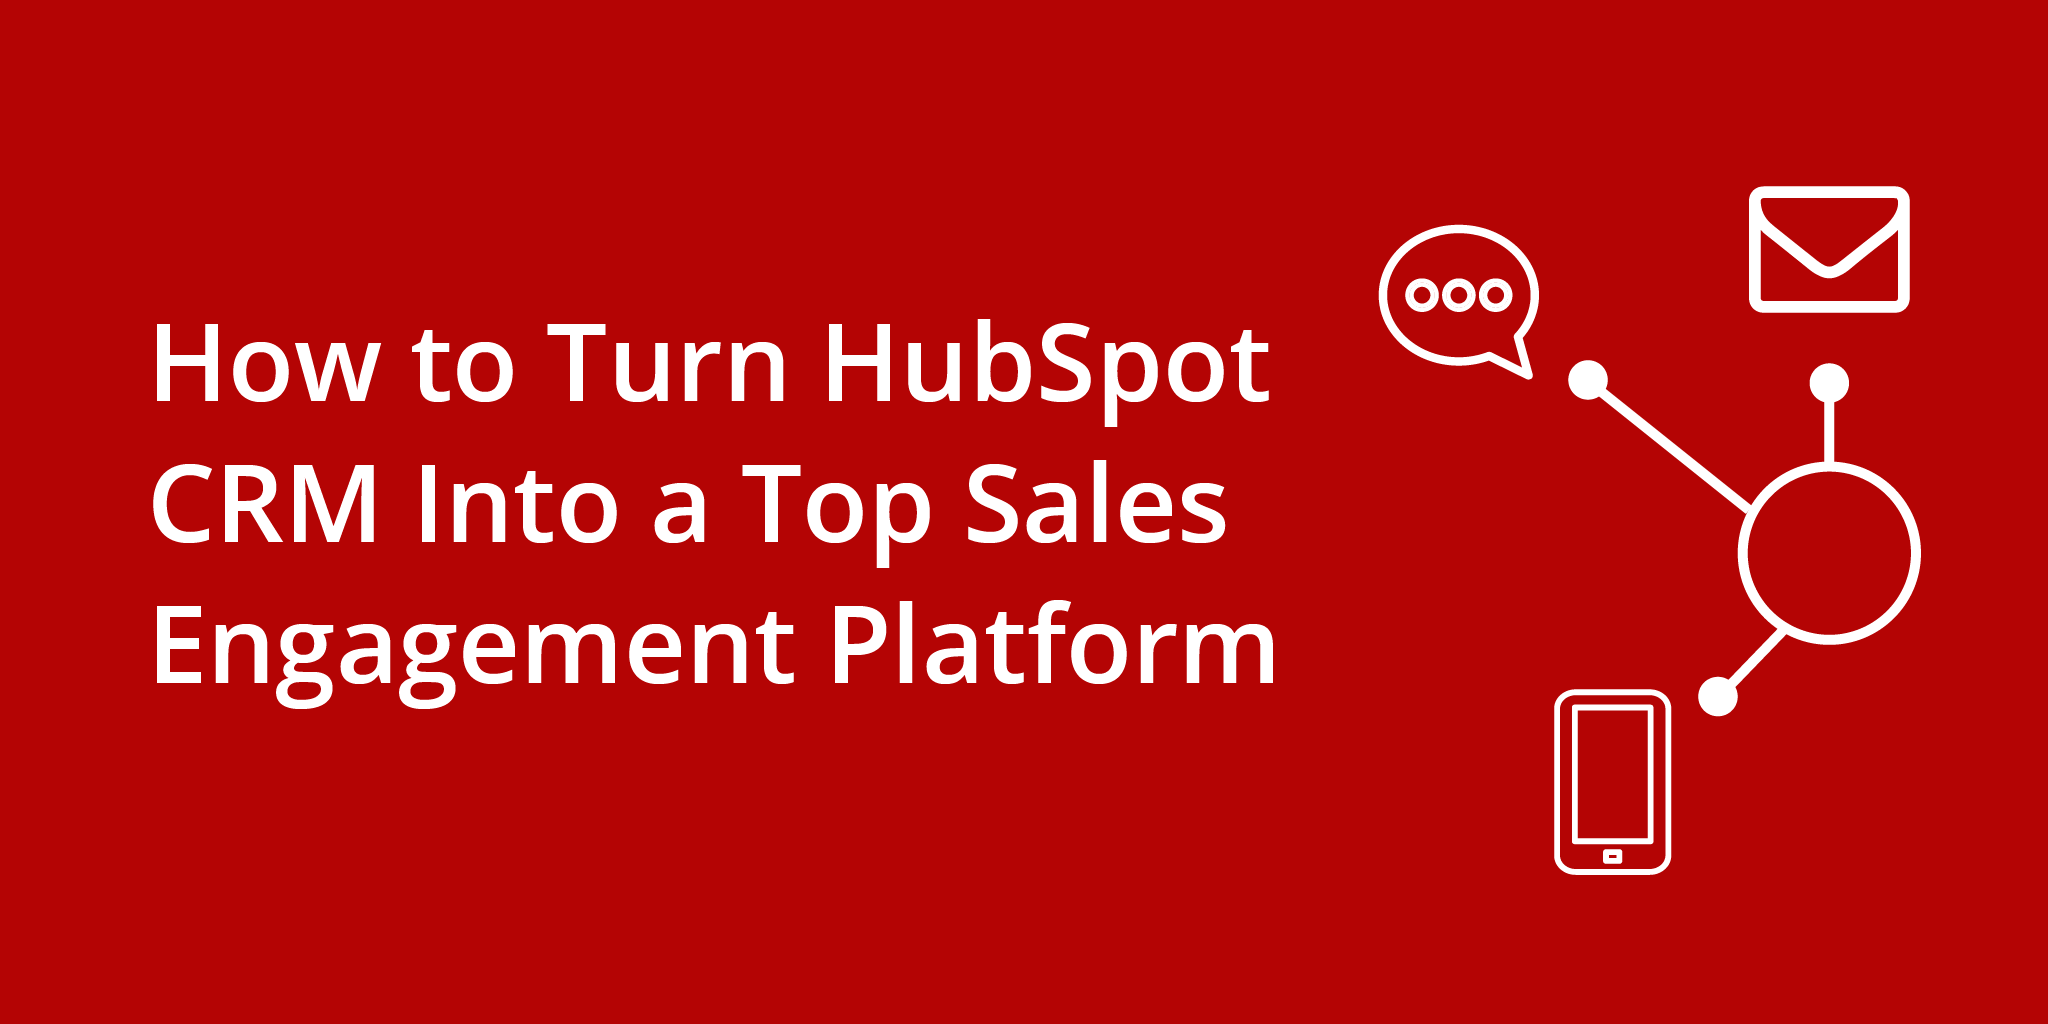 How to Turn HubSpot CRM Into a Top Sales Engagement Platform | Telephones for business